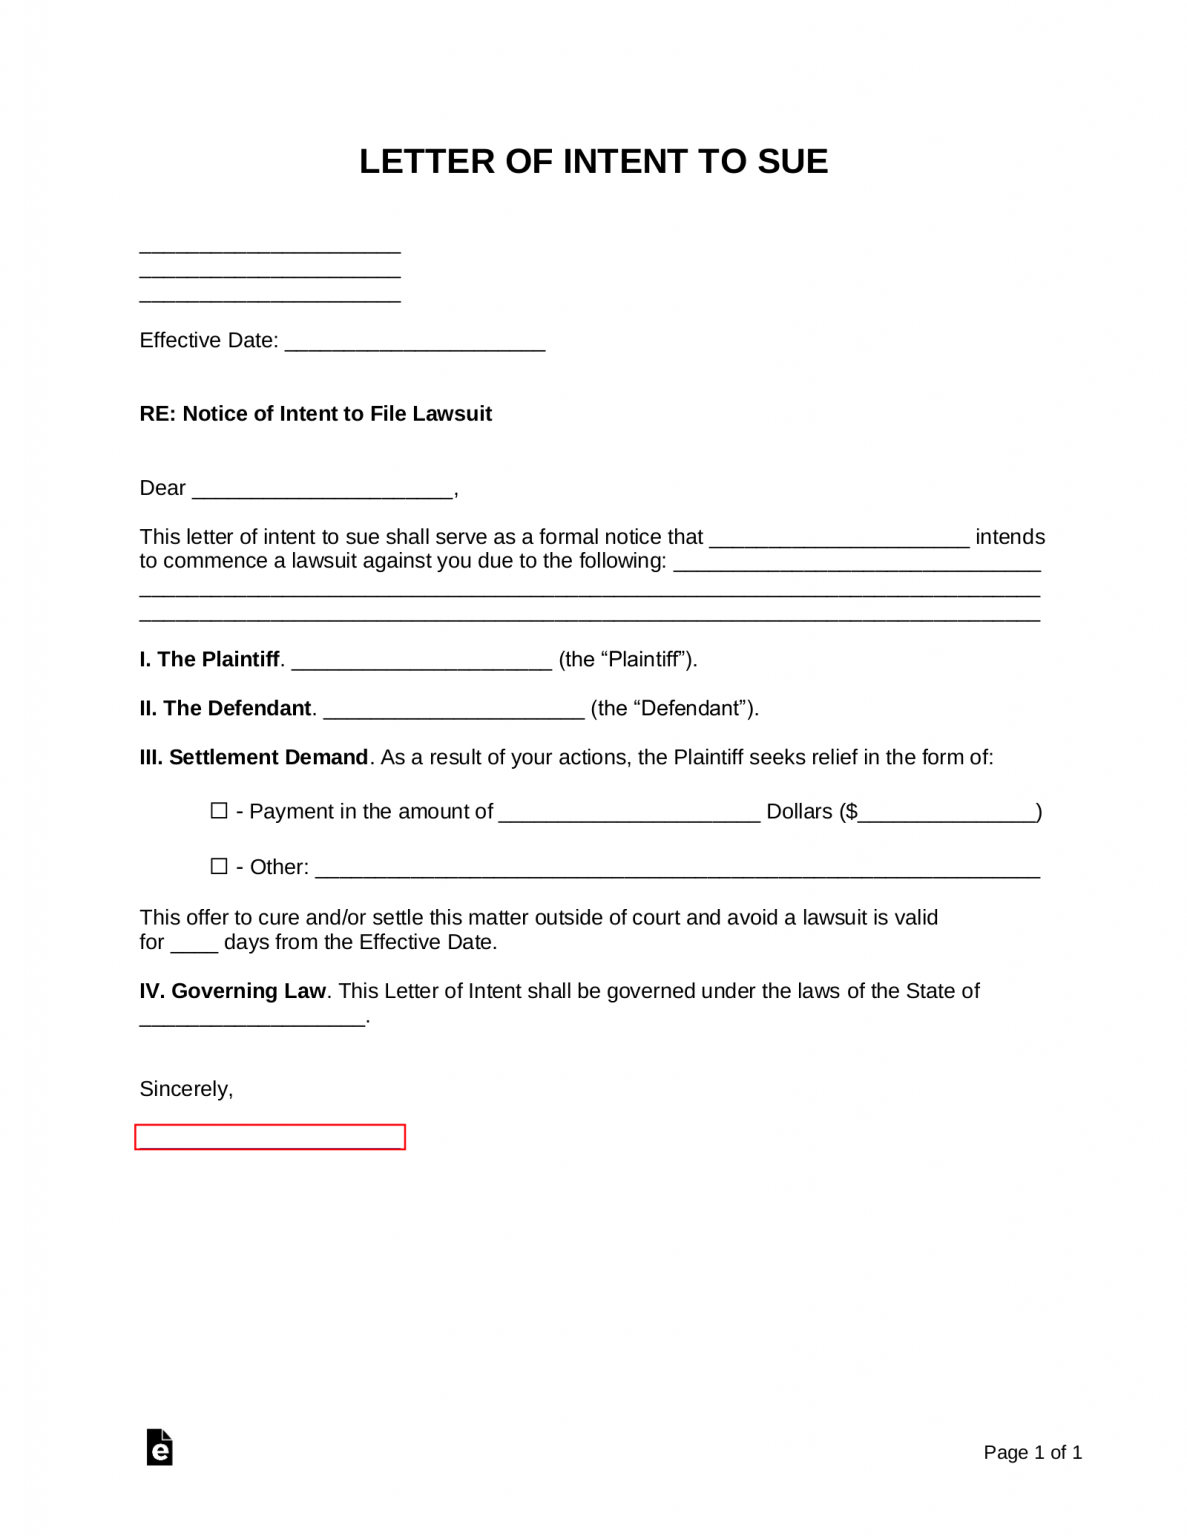 free-letter-of-intent-to-sue-with-settlement-demand-sample-pdf